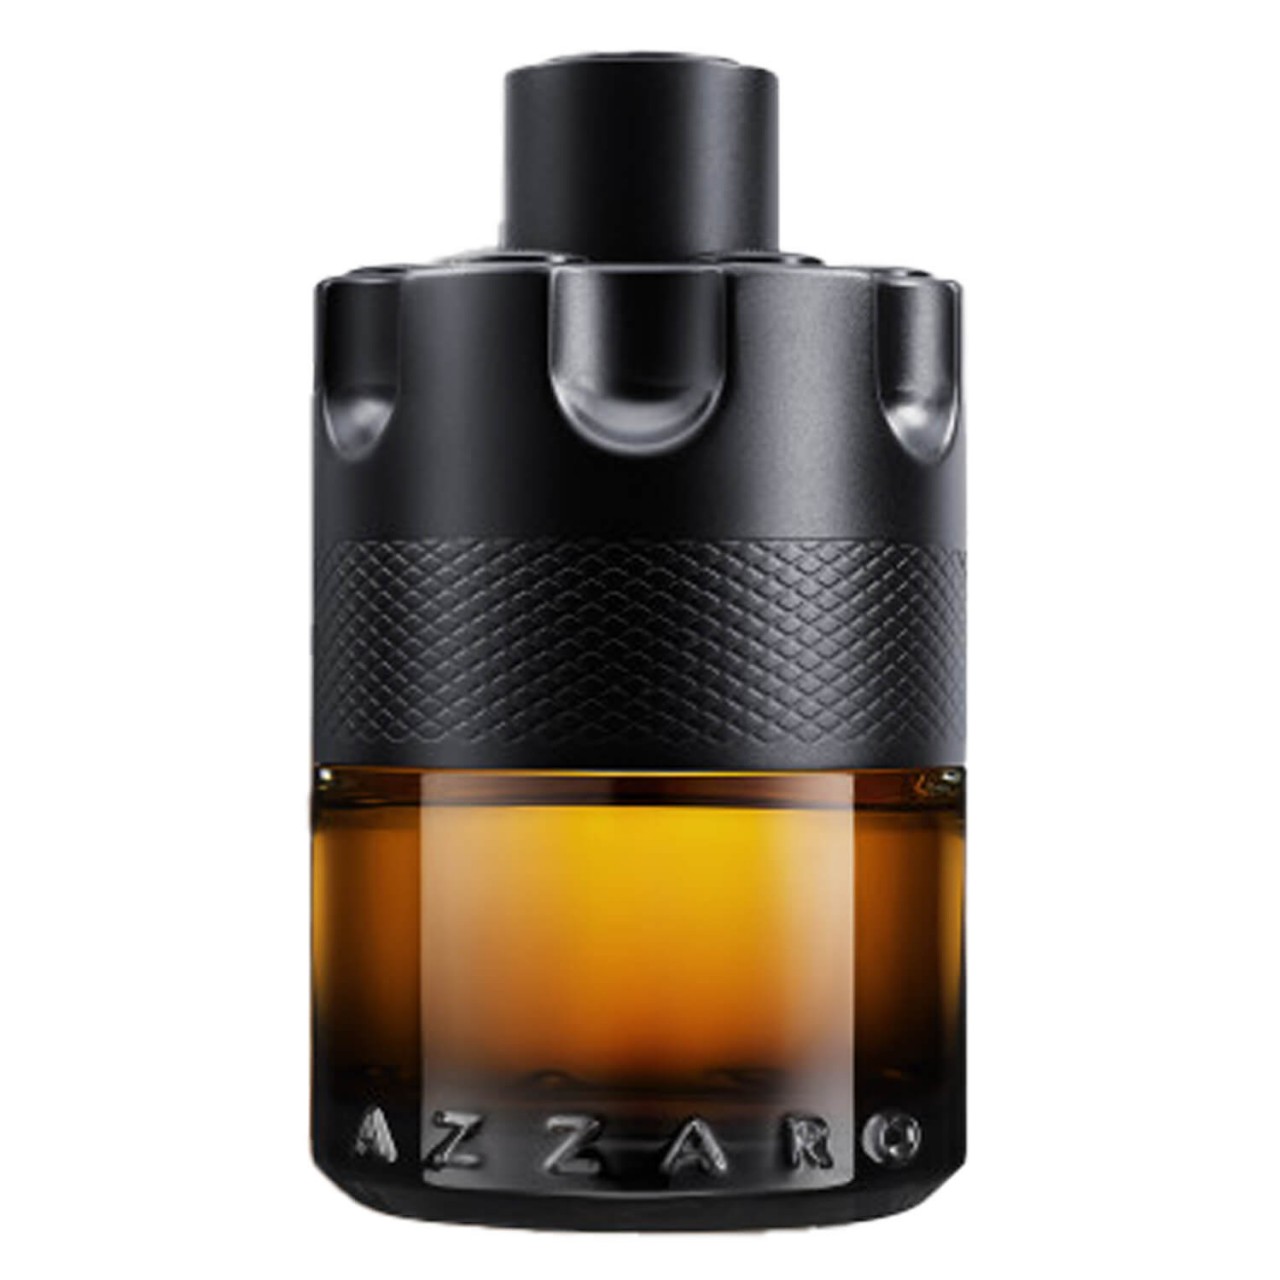 Azzaro Wanted - The Most Wanted Le Parfum von Azzaro